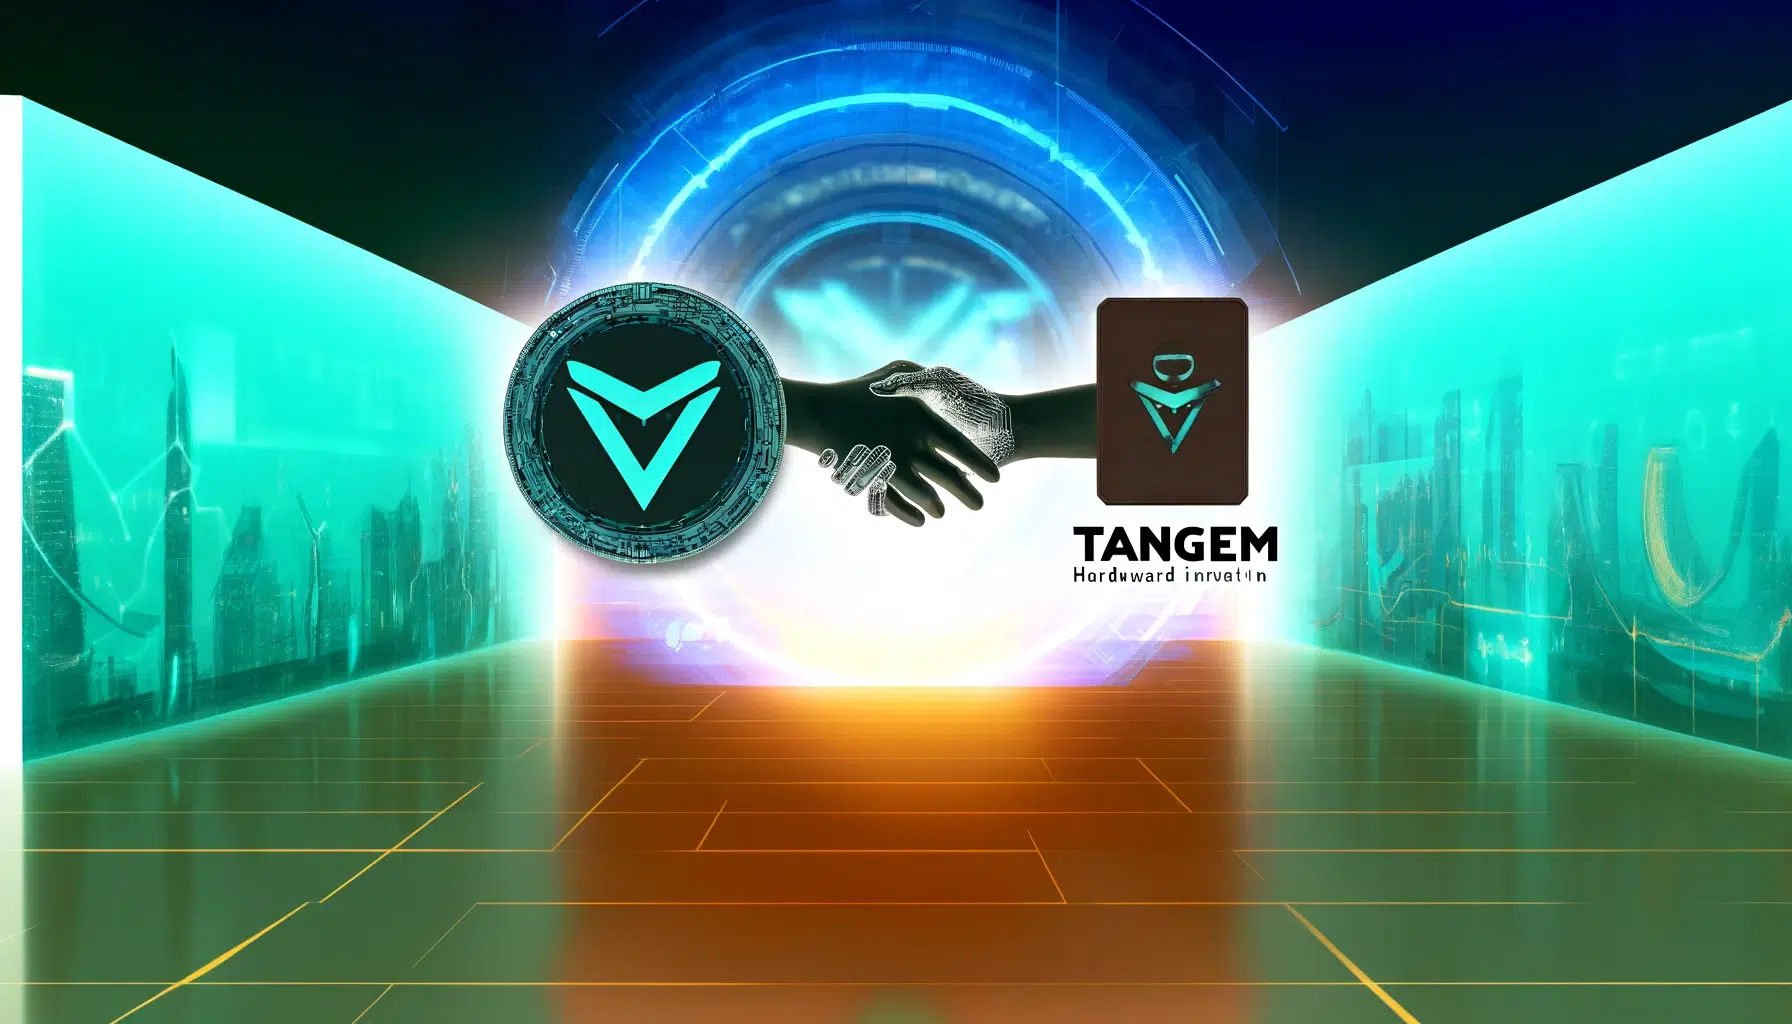 VeChain and Tangem Join Forces for Hardware Wallet Innovation